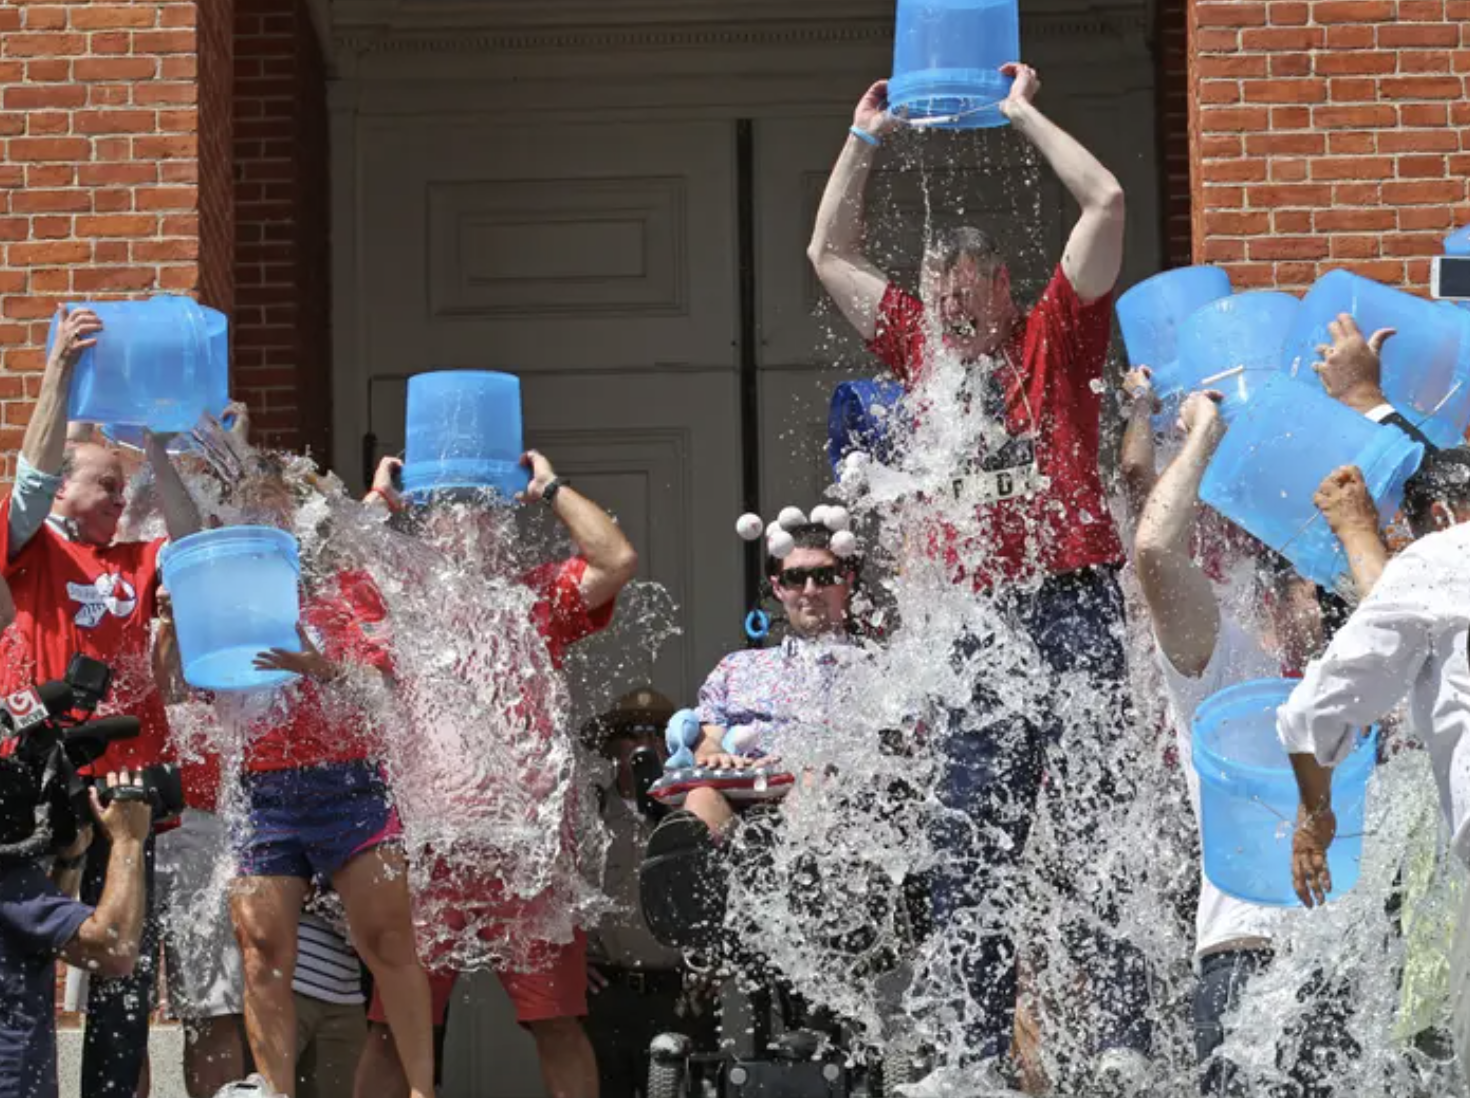 A bunch of people in red shirts dump blue buckets full of ice cold water over their head